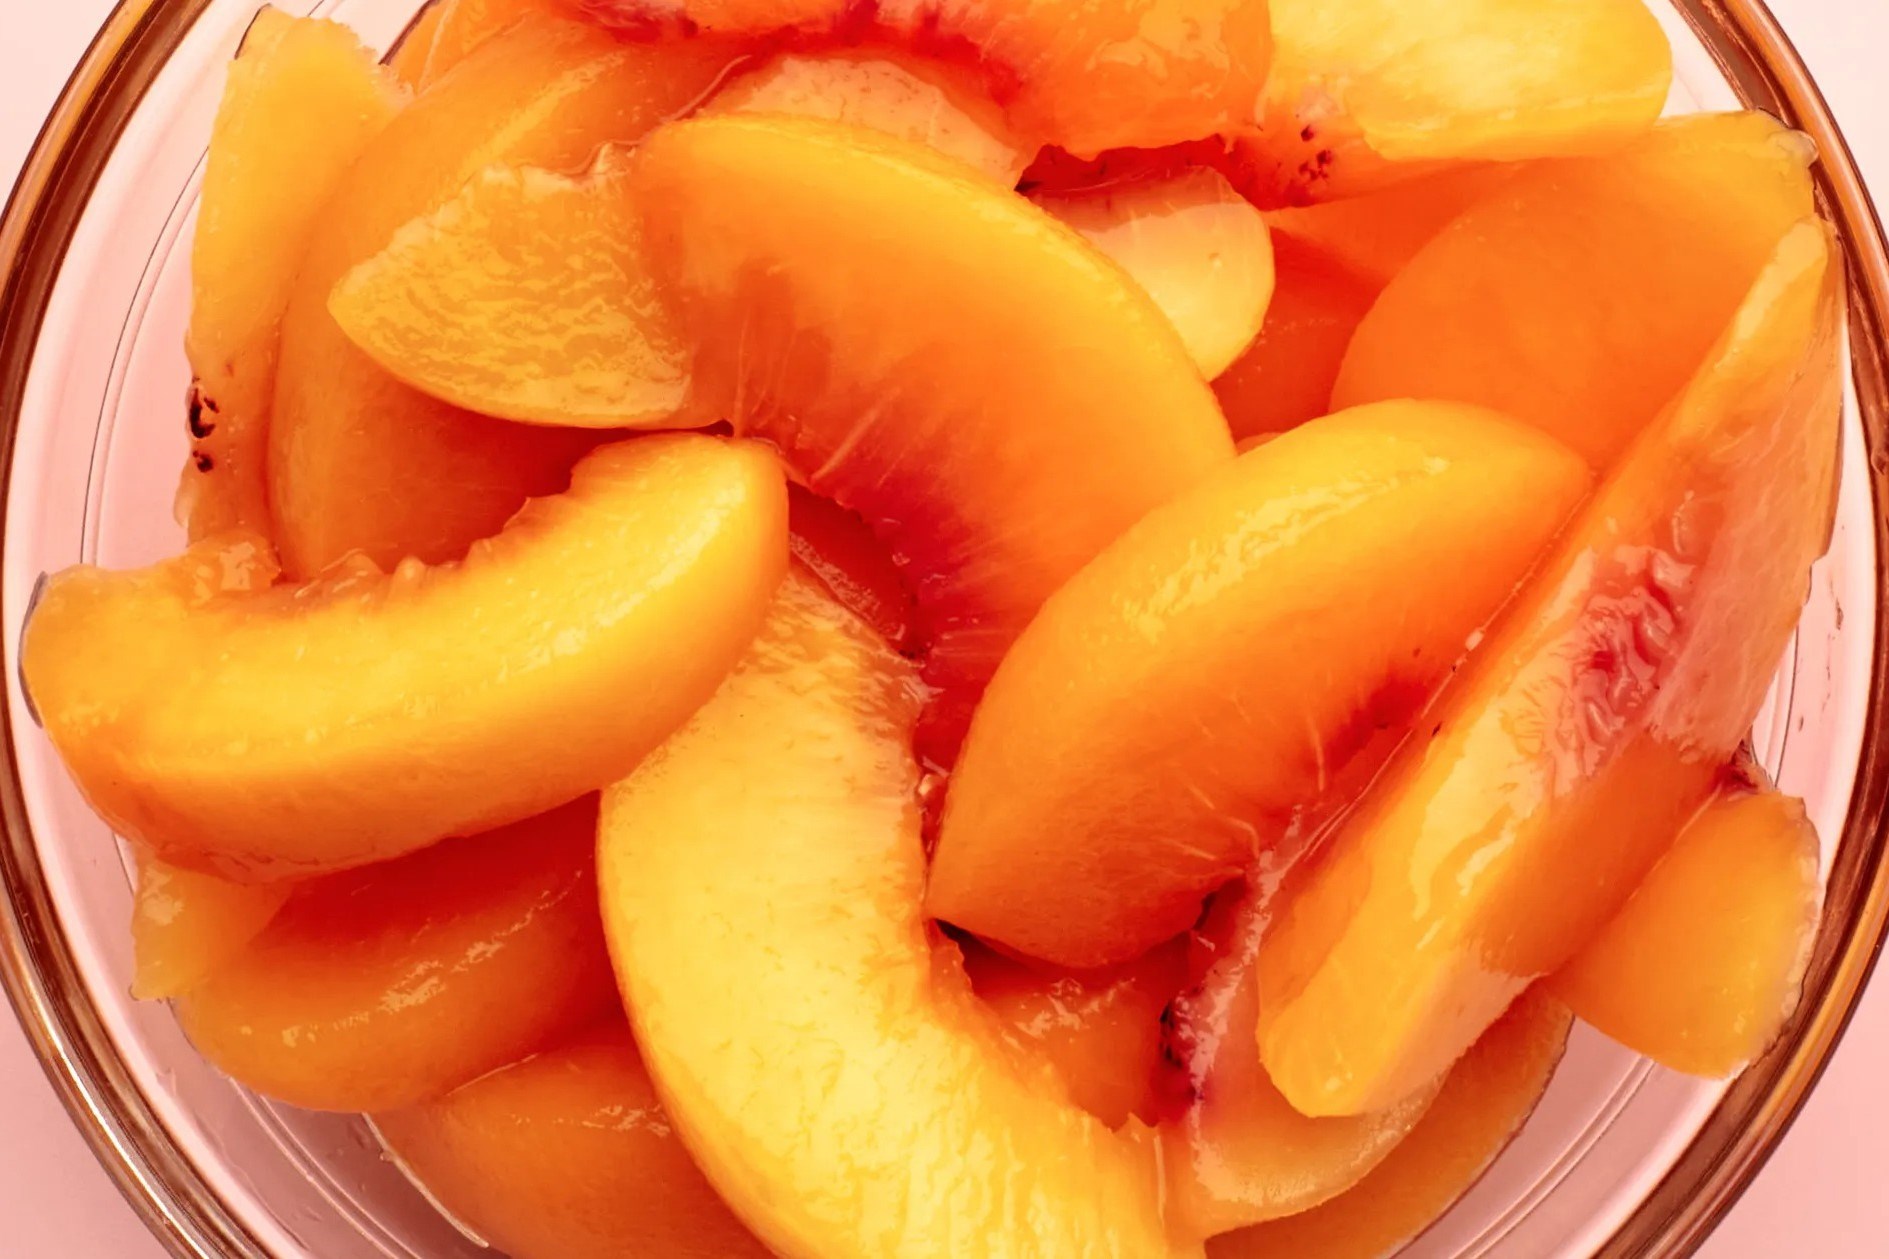 11-sliced-peaches-nutrition-facts